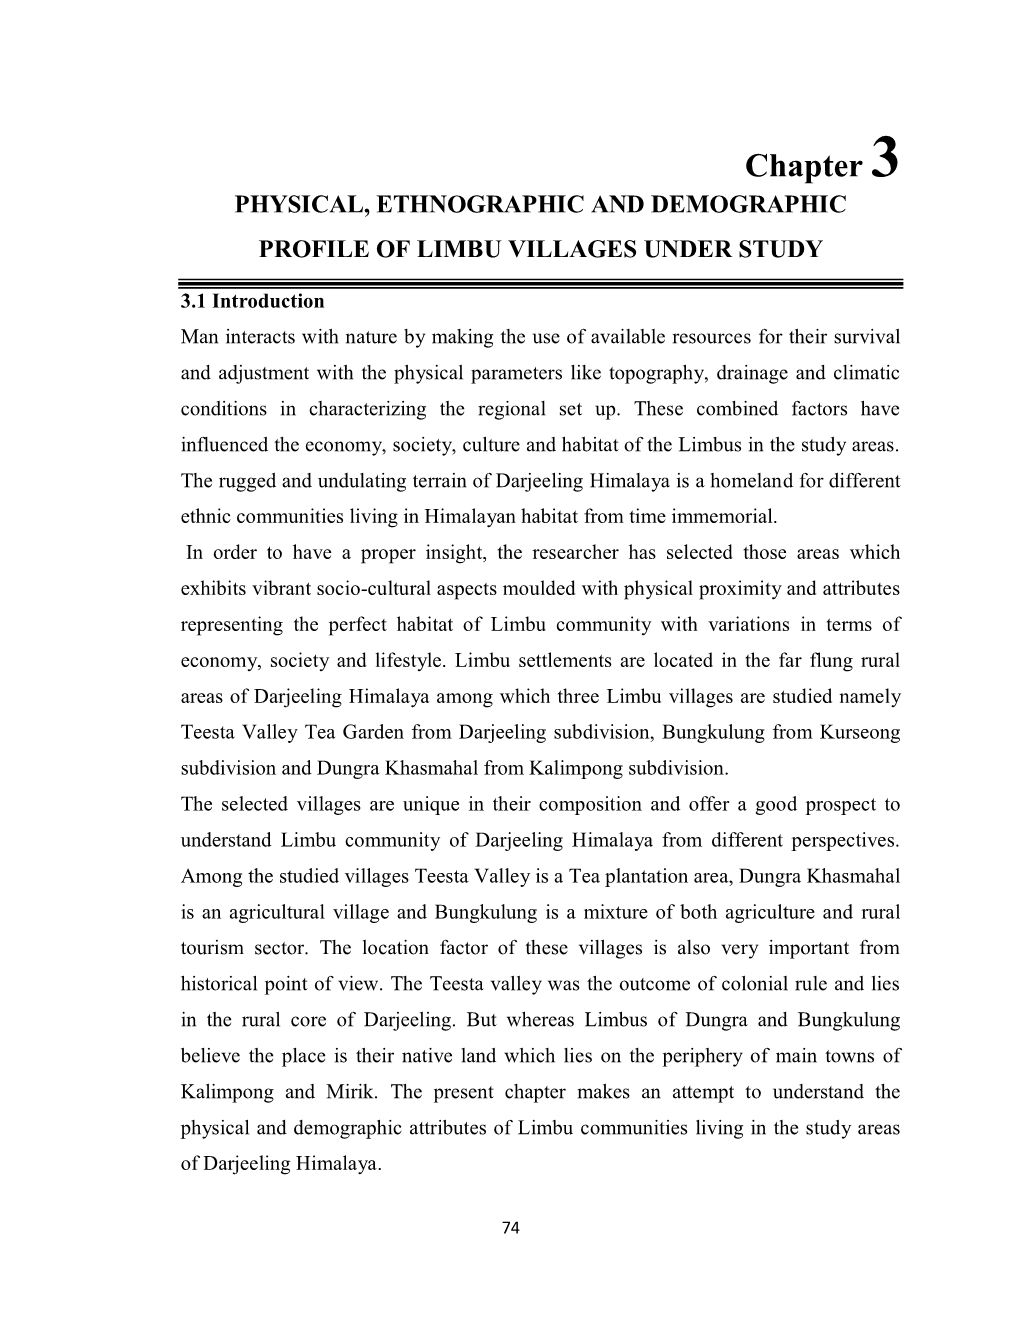 Chapter 3 PHYSICAL, ETHNOGRAPHIC and DEMOGRAPHIC PROFILE of LIMBU VILLAGES UNDER STUDY